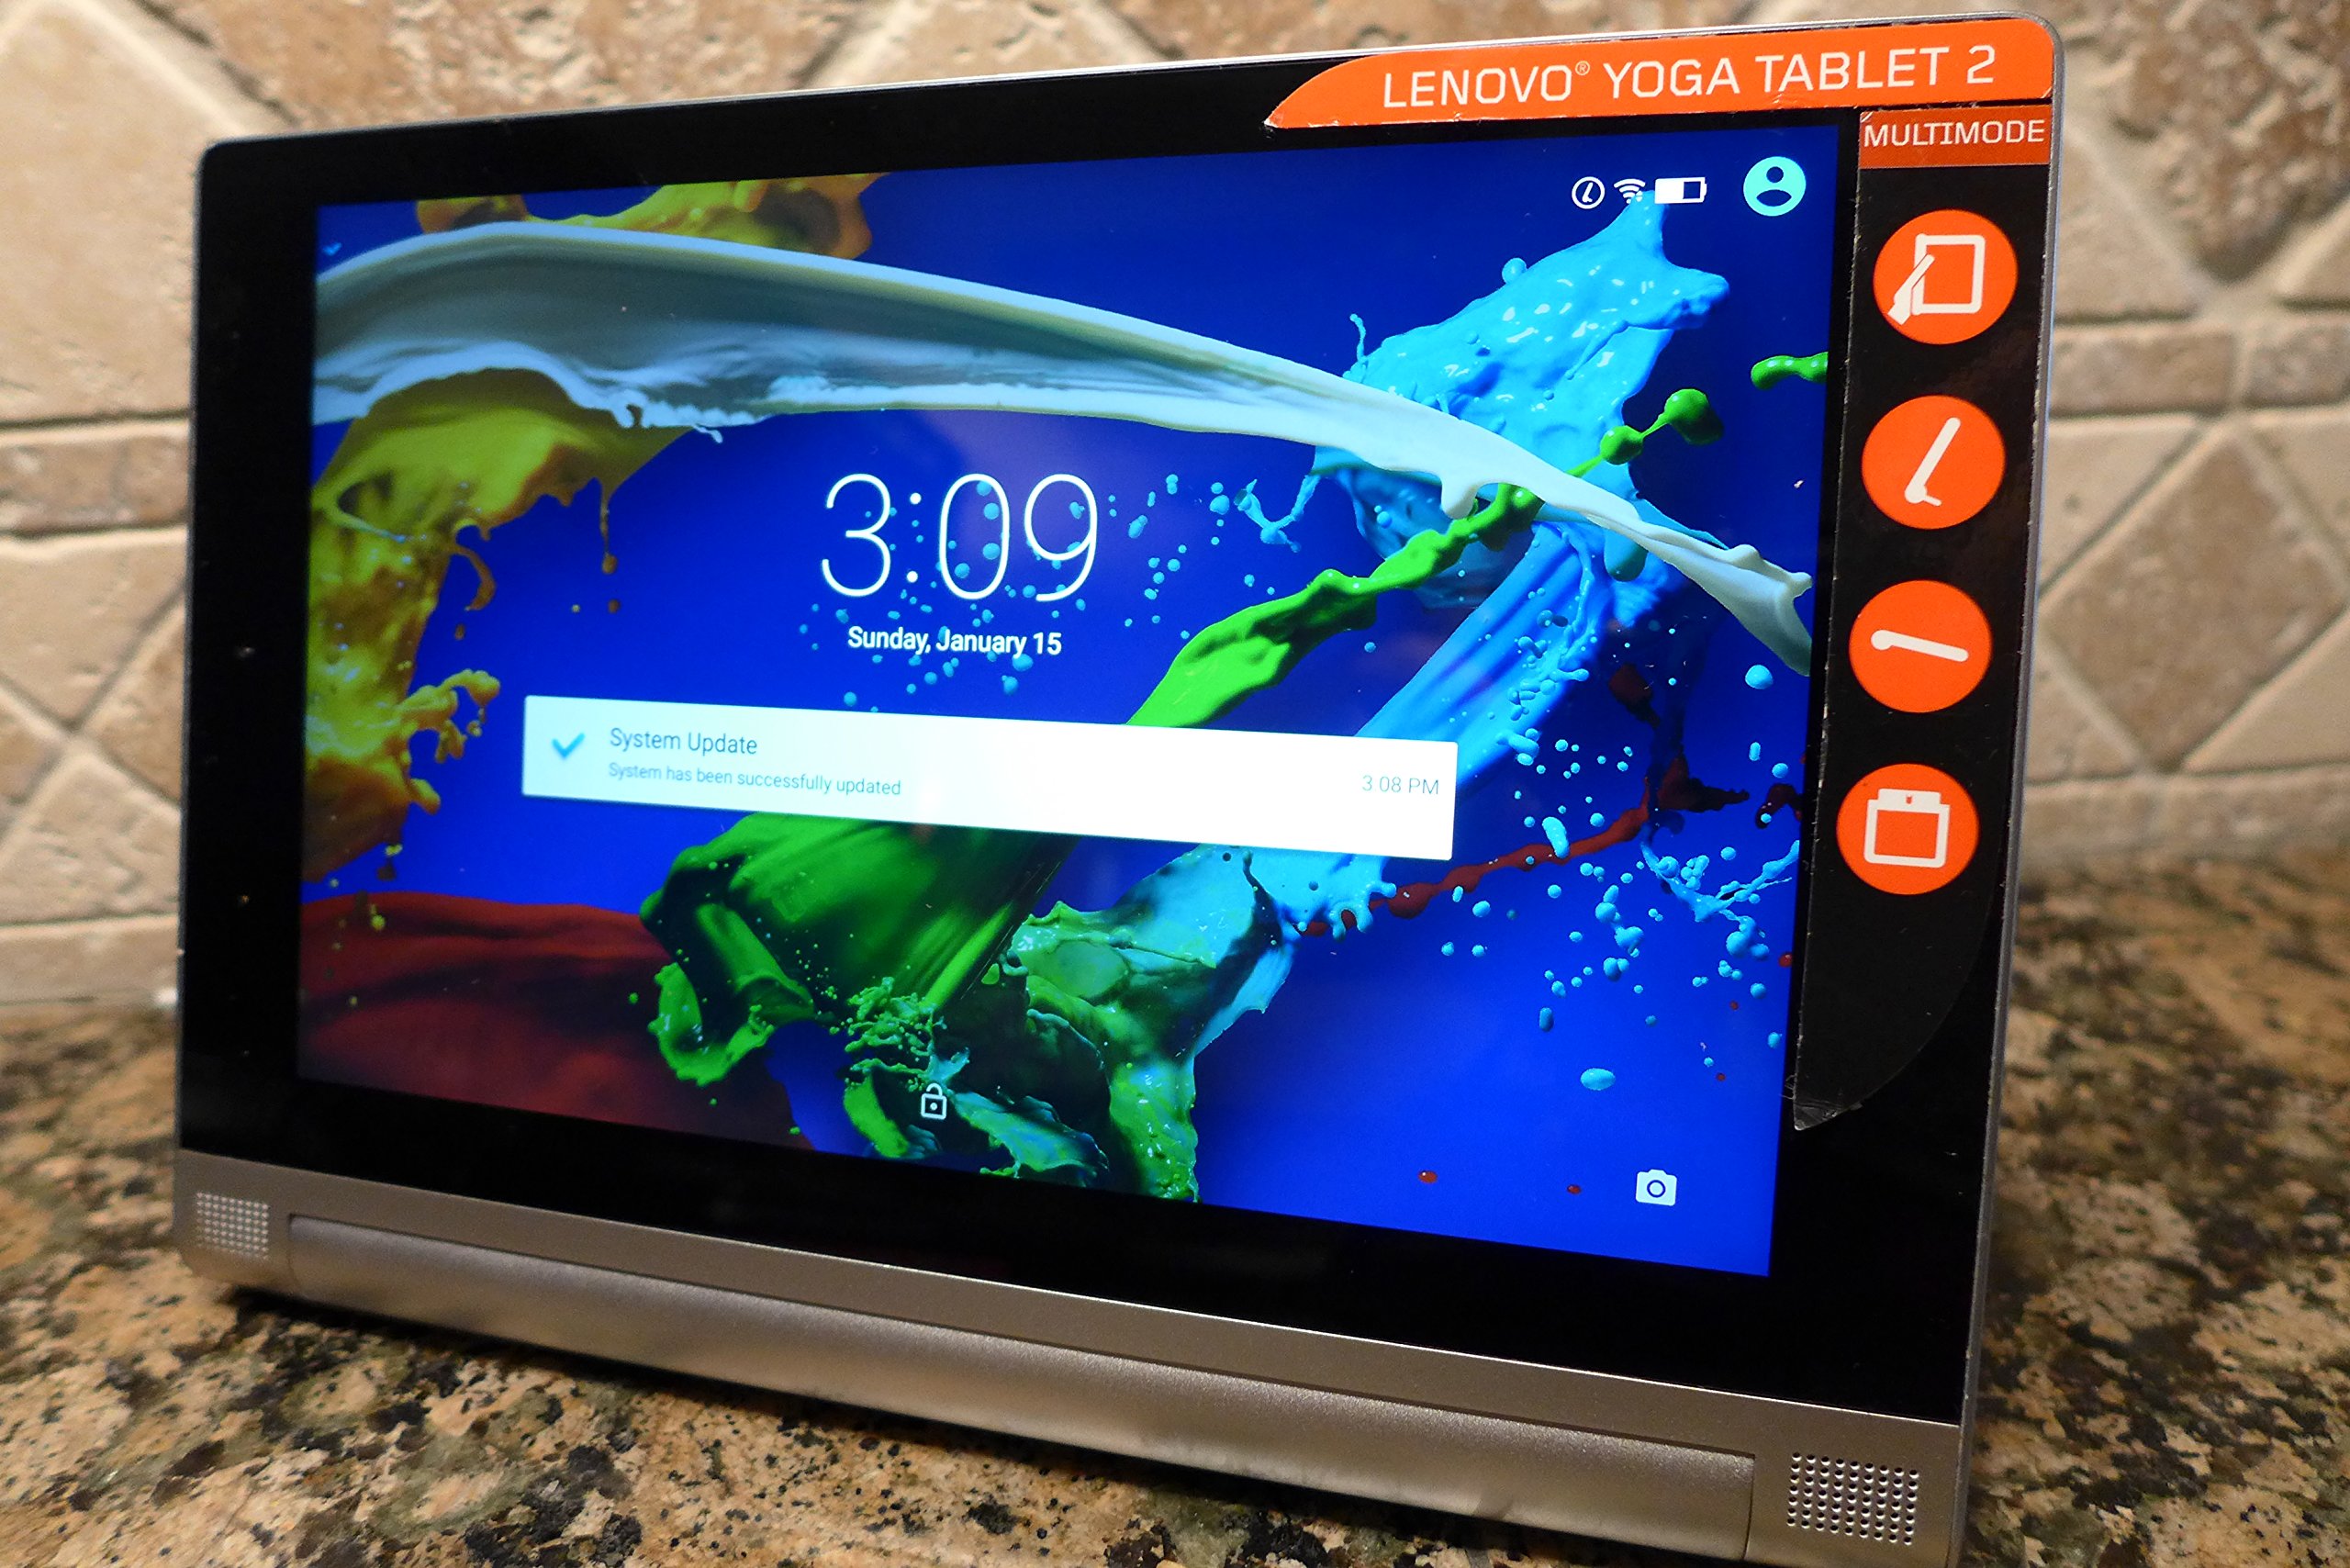 Lenovo Yoga Tablet 2-830F 8.0" Android Tablet 1.8Ghz 16GB Wi-Fi Silver